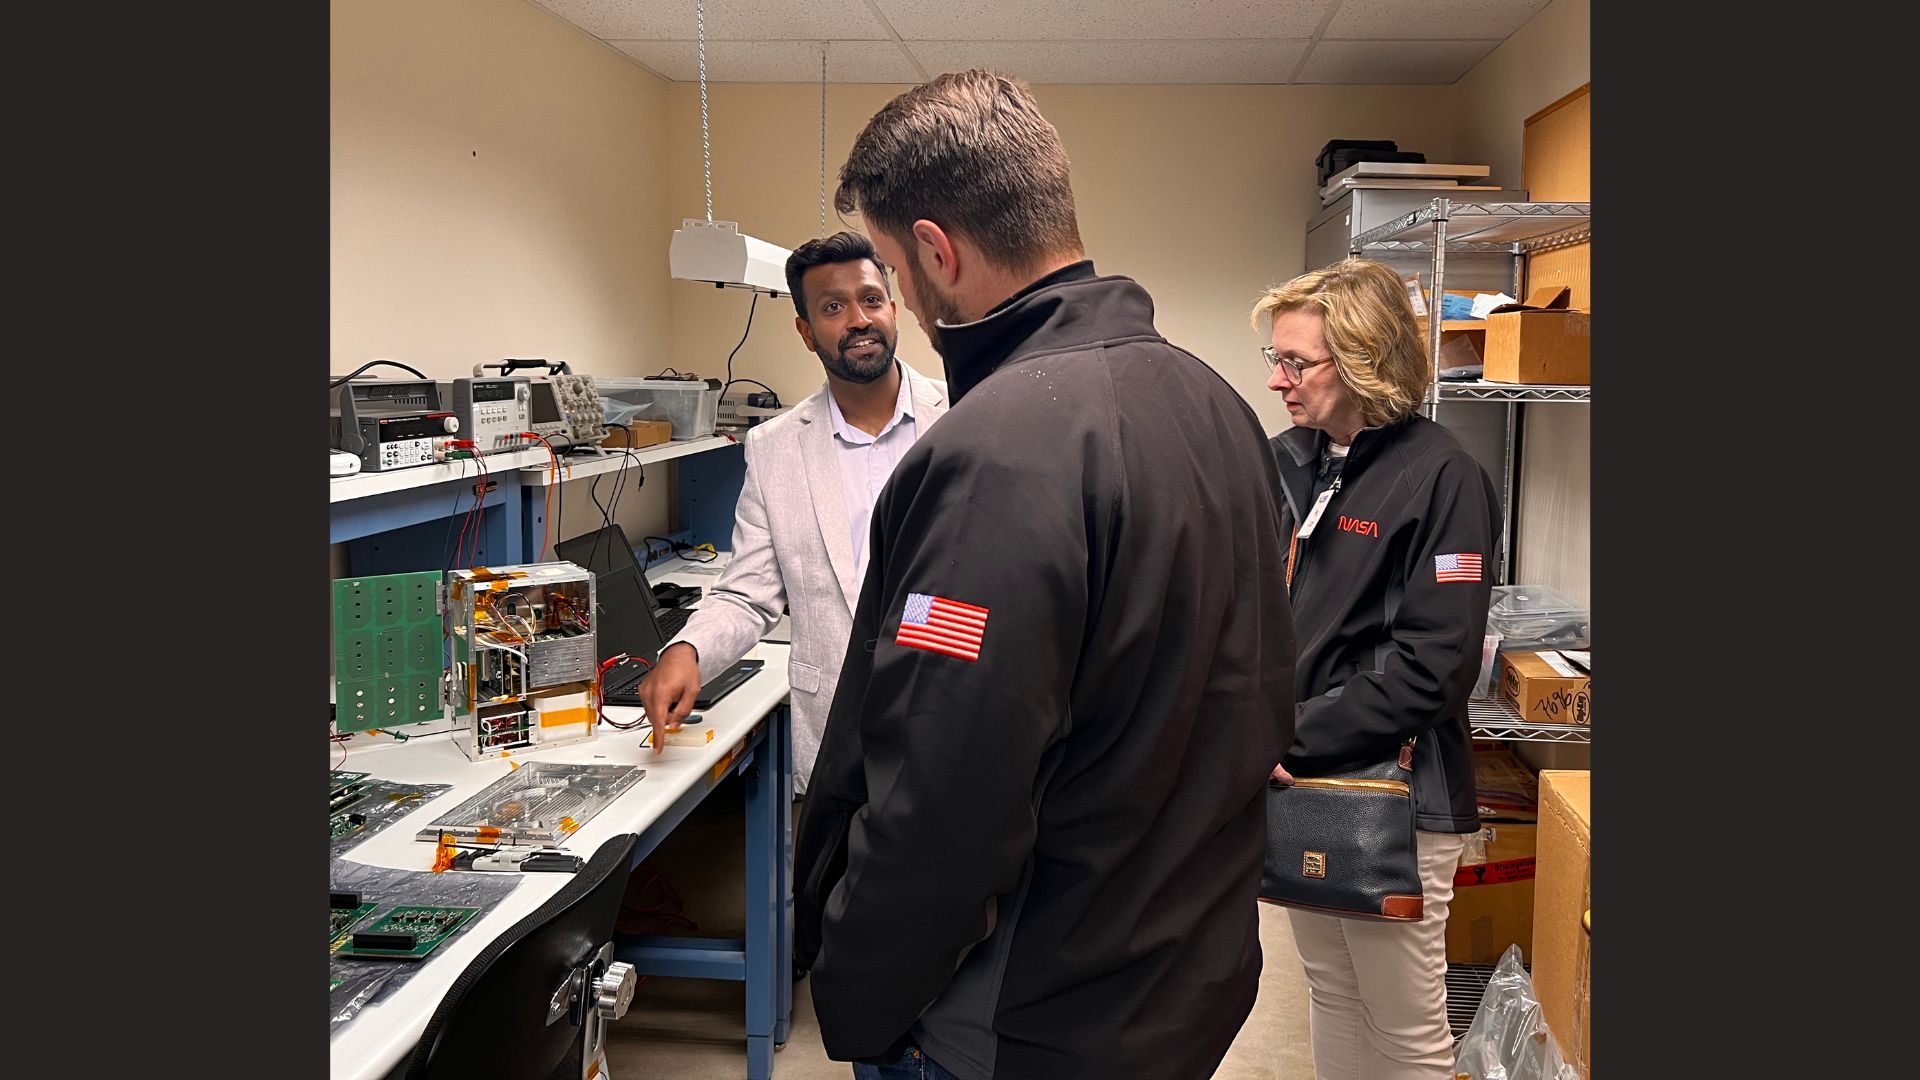 In April, NASA Heliophysics Division Director Joe Westlake (middle) and Deputy Director Peg Luce (right) toured LASP, where they saw eight different CubeSat missions currently in development and spoke with LASP CubeSat Program Lead Amal Chandran (left). Credit: LASP